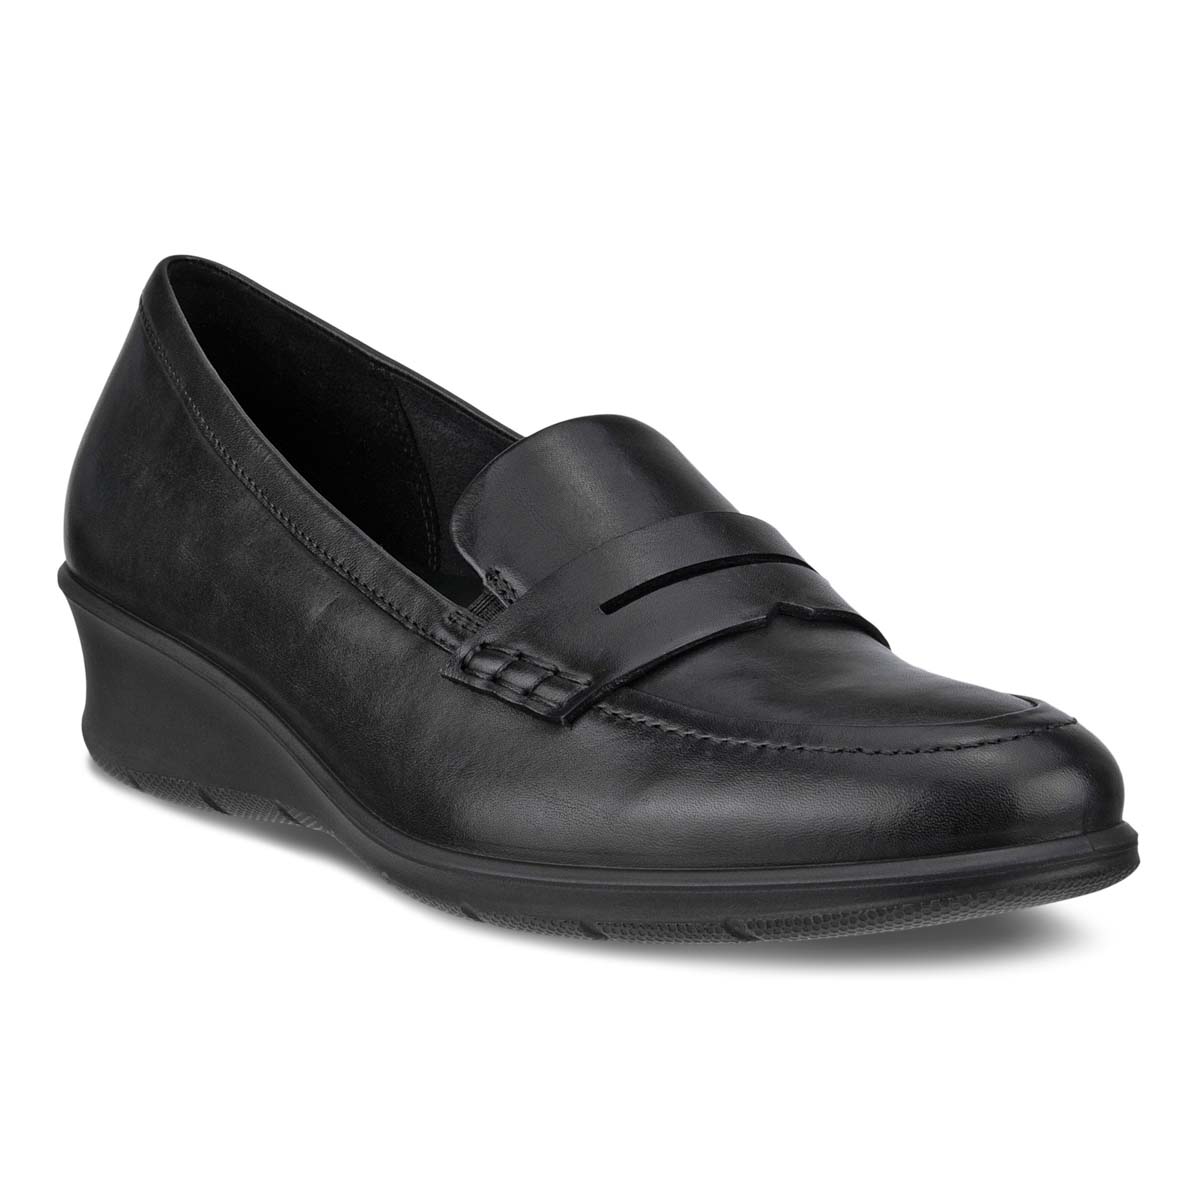 Ecco Felicia Loafer Black Leather Womens Comfort Slip On Shoes 217323-01001 In Size 42 In Plain Black Leather